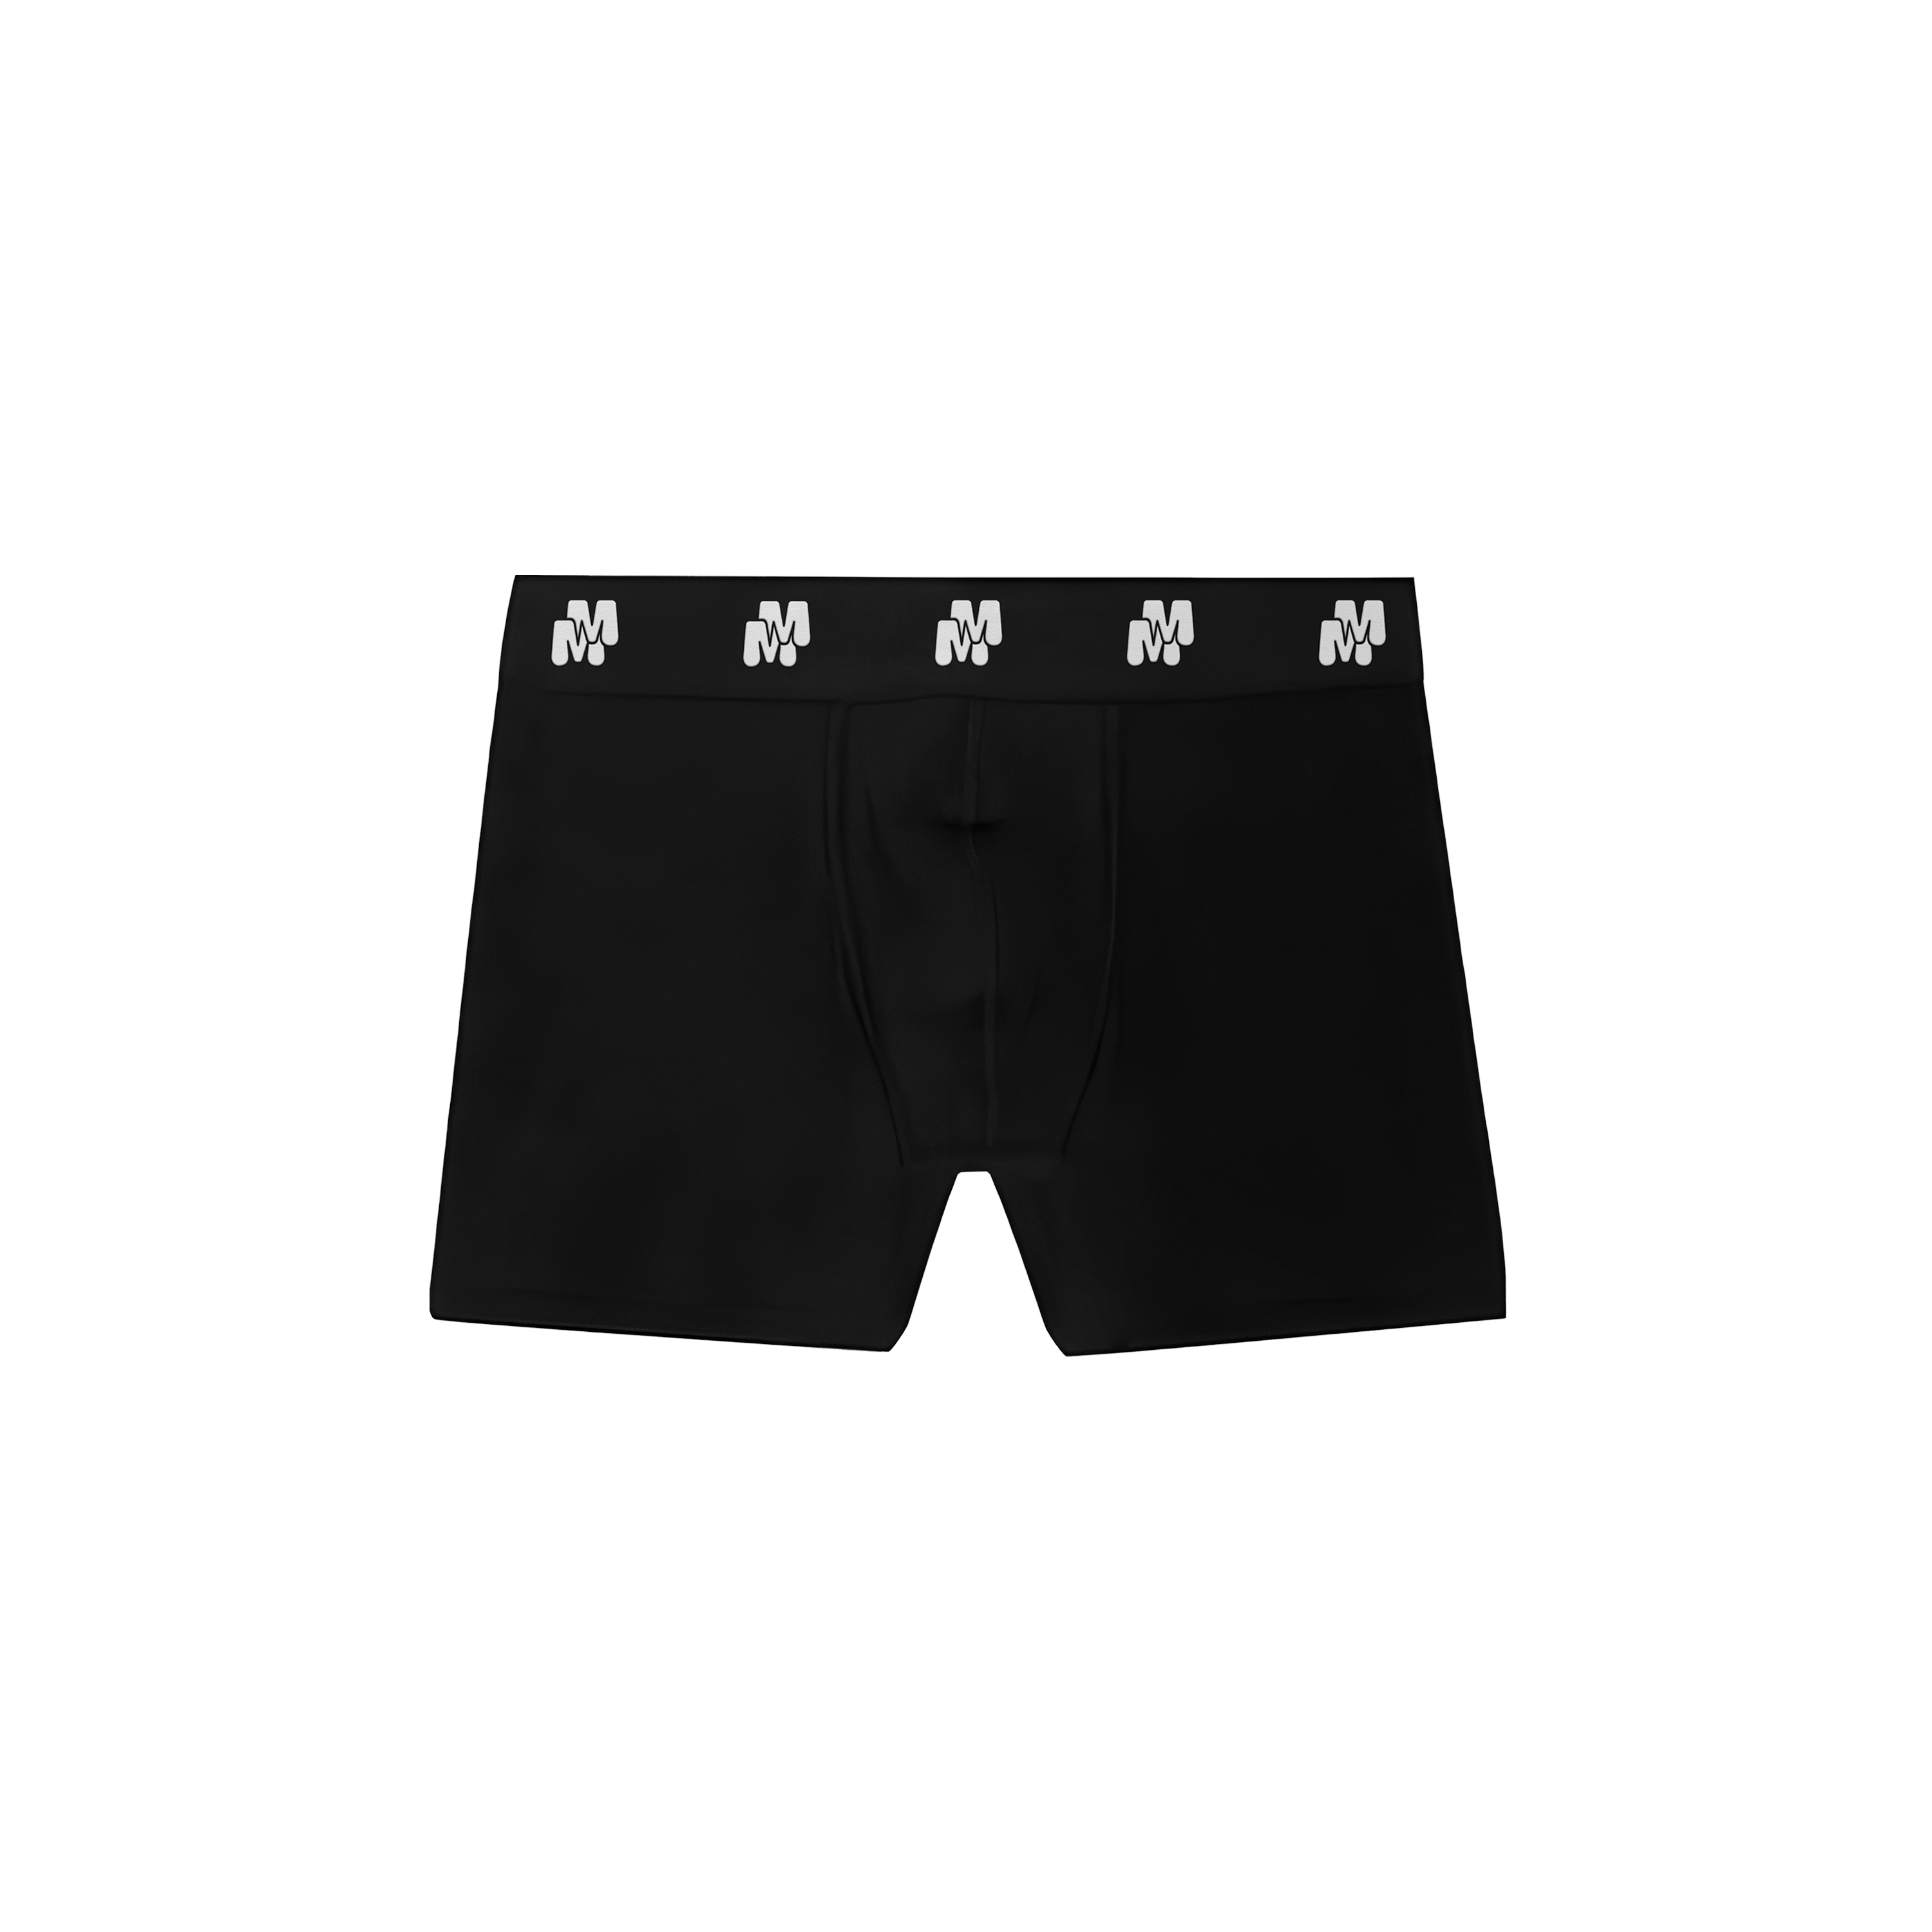 YUMMS BOXER BRIEFS in BLACK (1-PACK) - YUMMS STORE